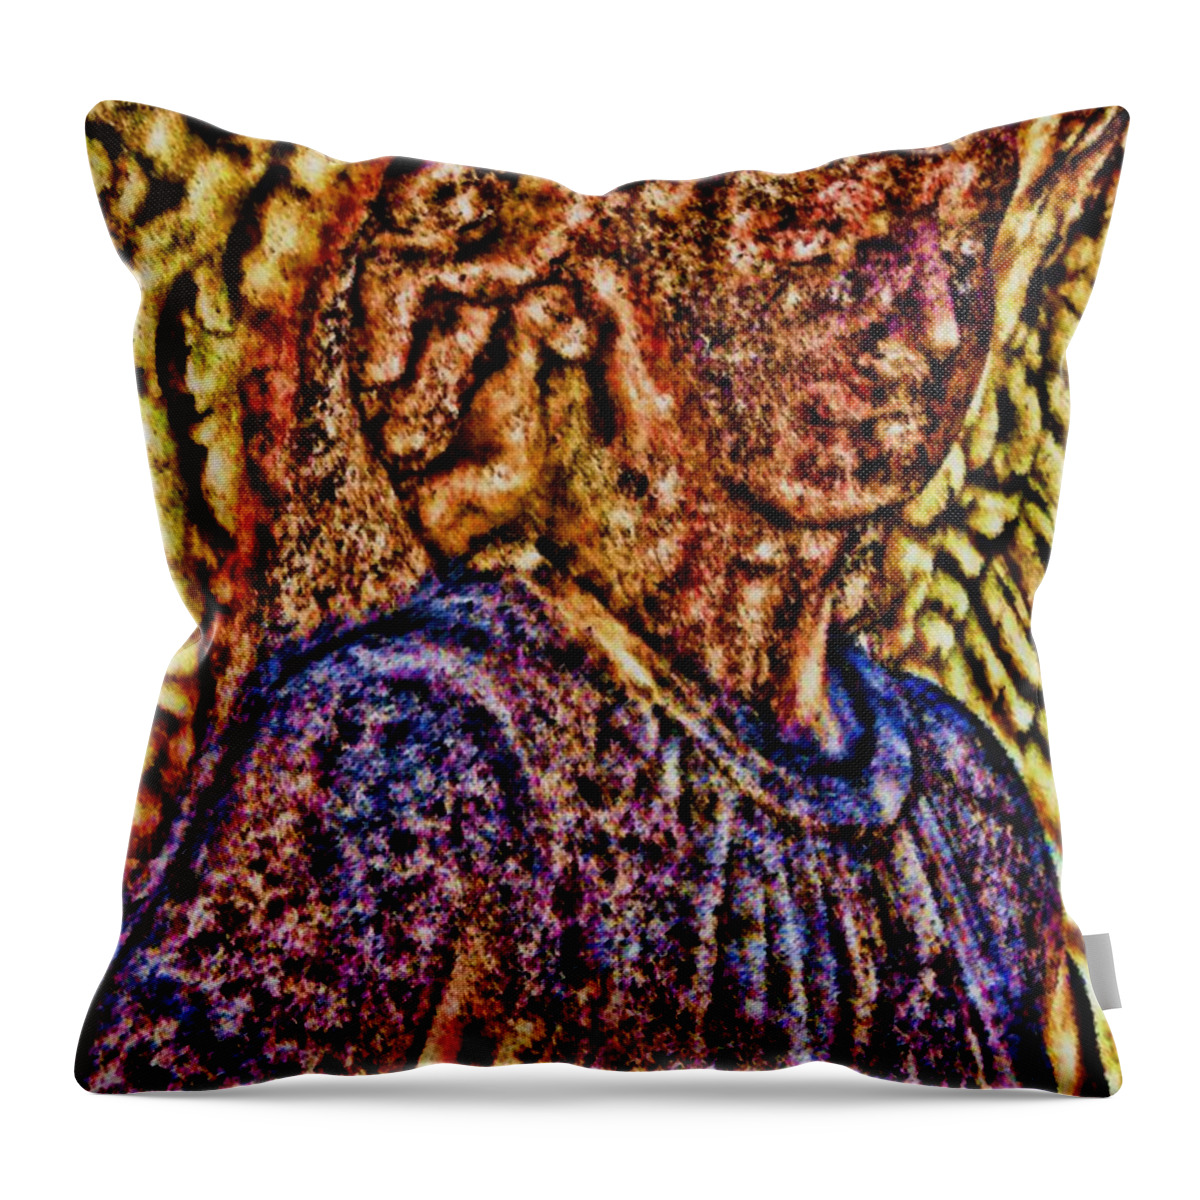 Angel Throw Pillow featuring the digital art An Angels Work Is Done by Vincent Green